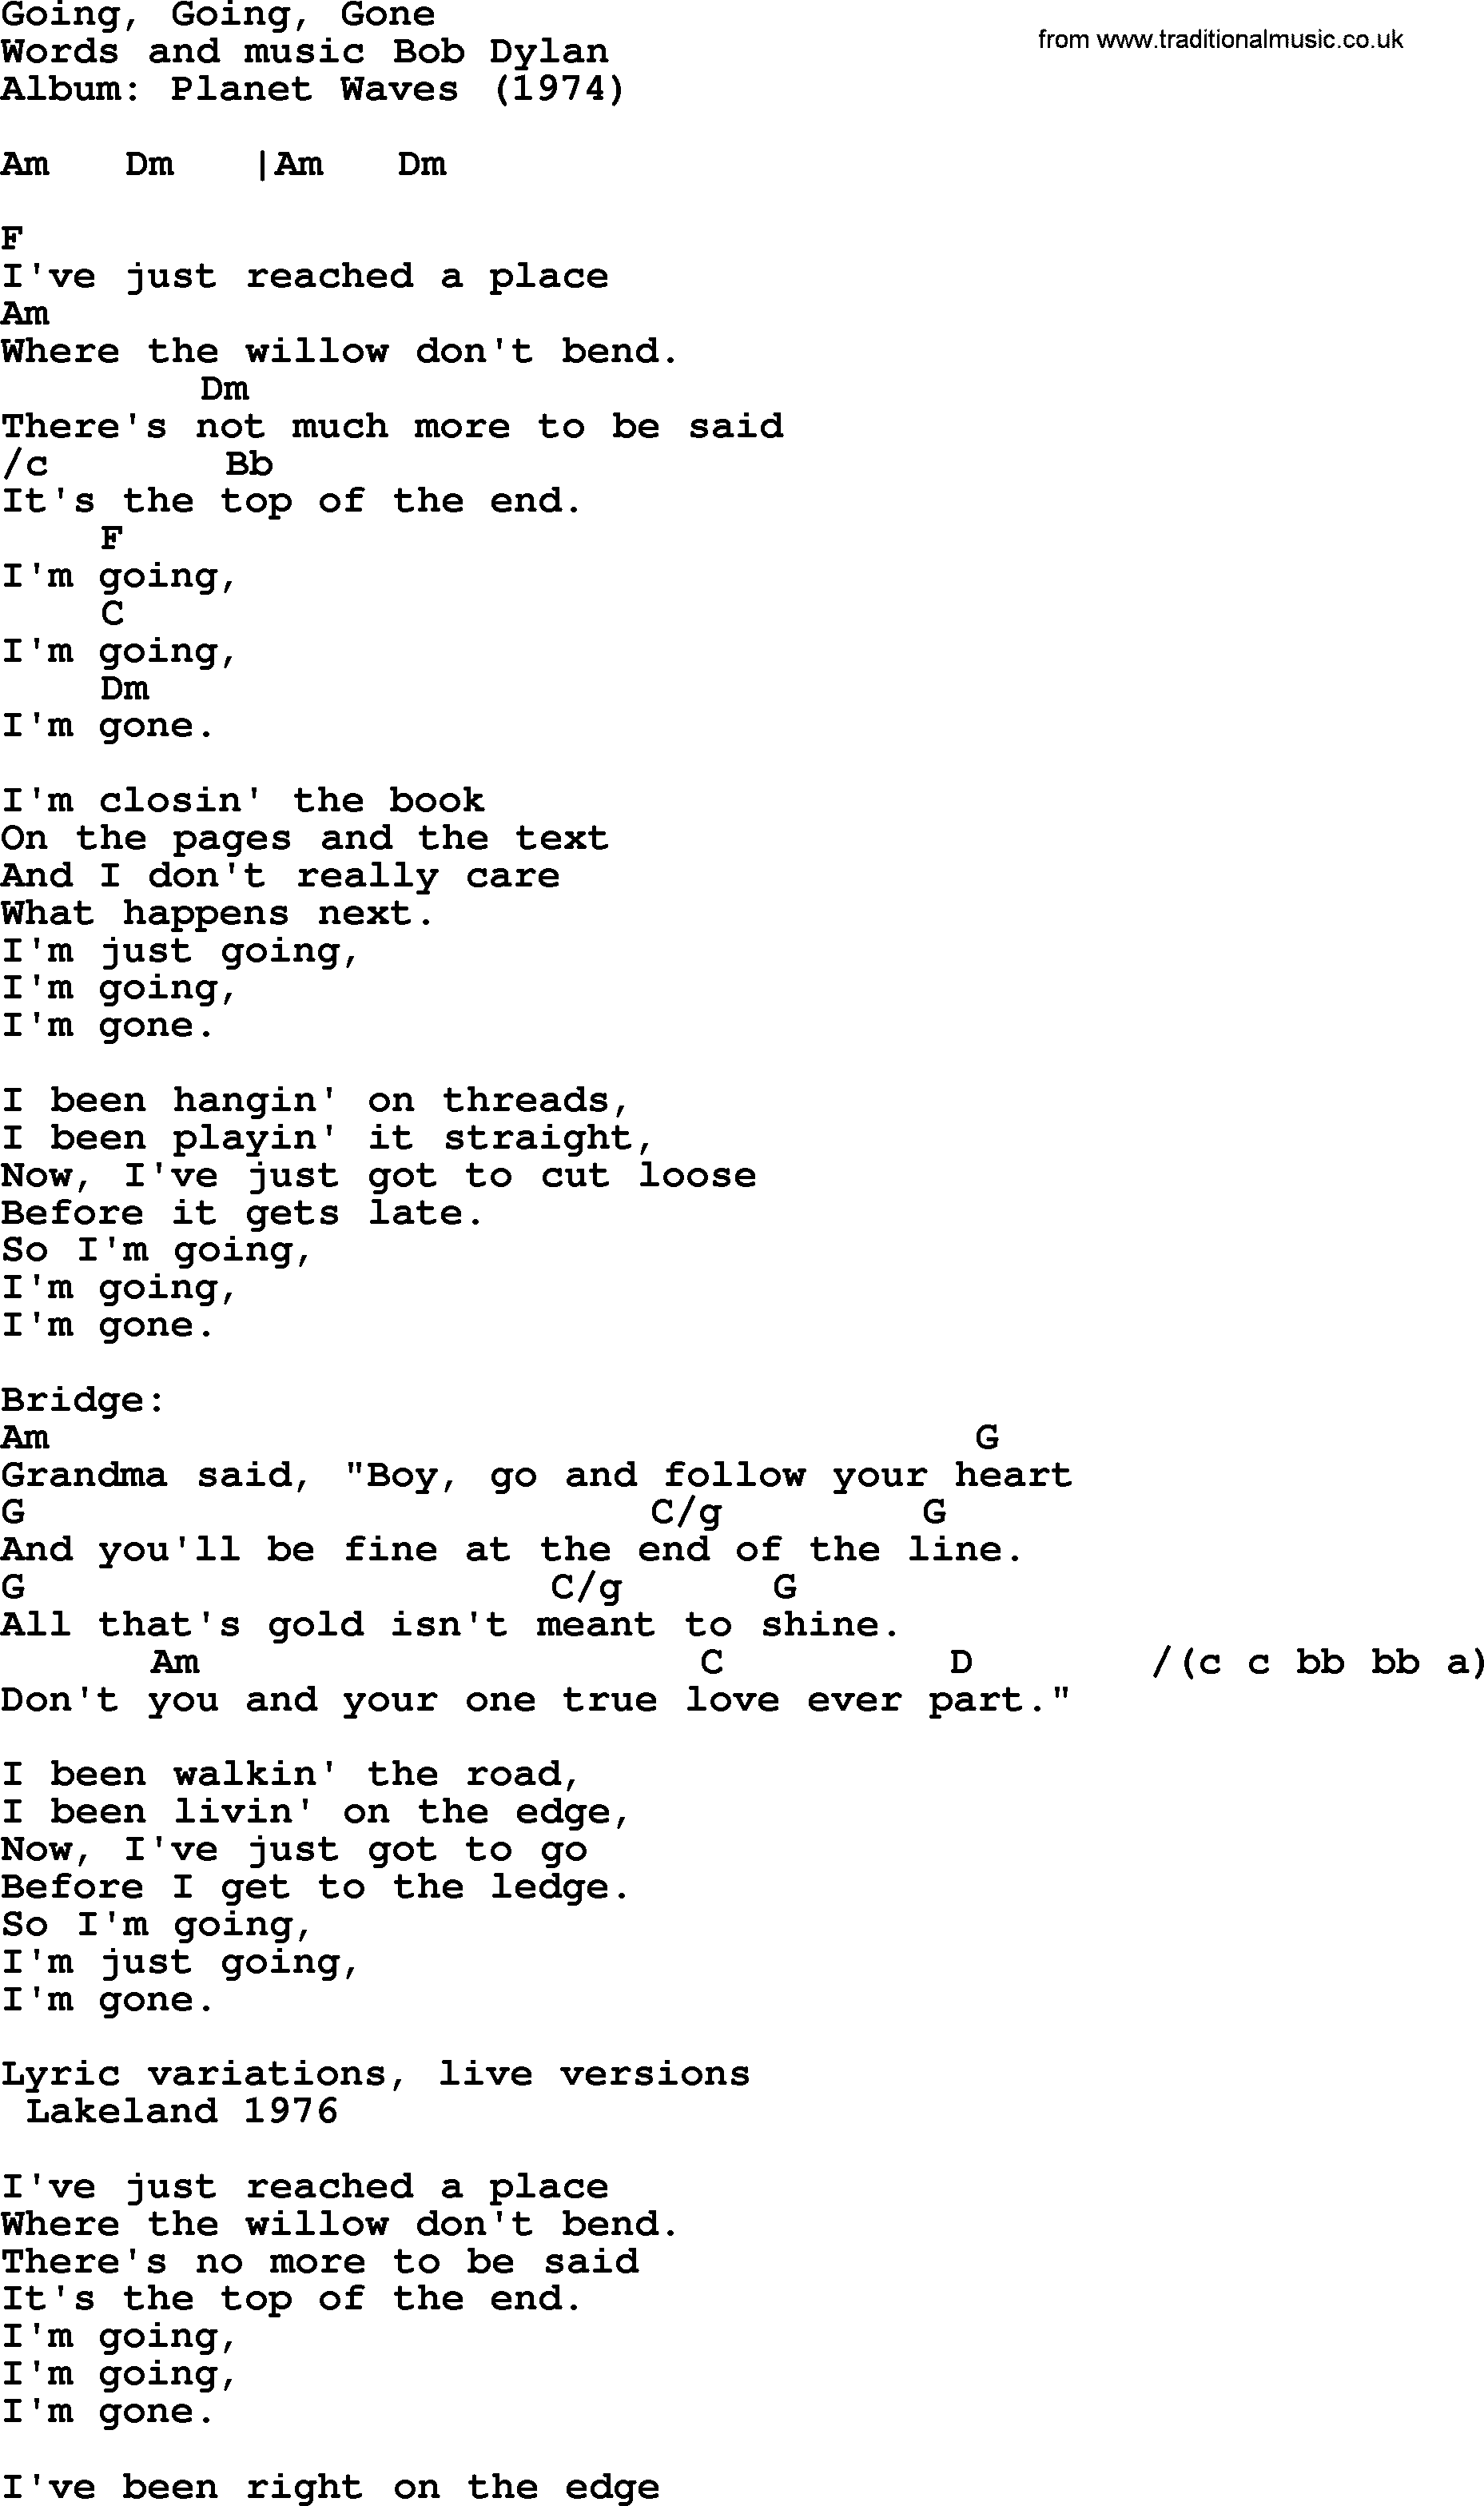 Bob Dylan song, lyrics with chords - Going, Going, Gone